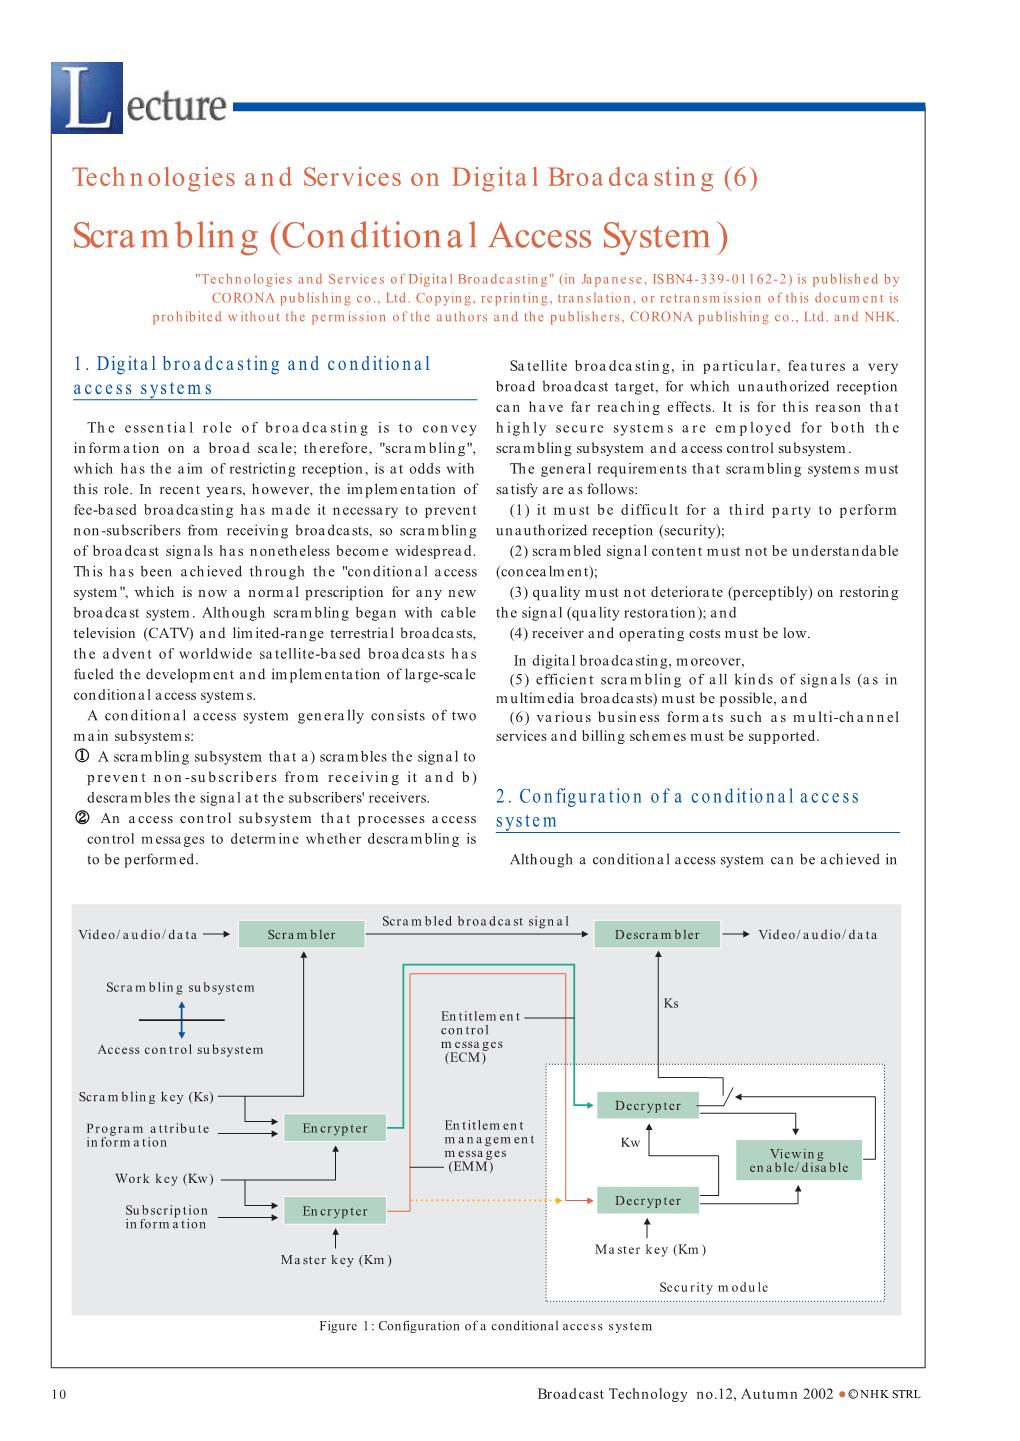 6): Scrambling (Conditional Access System